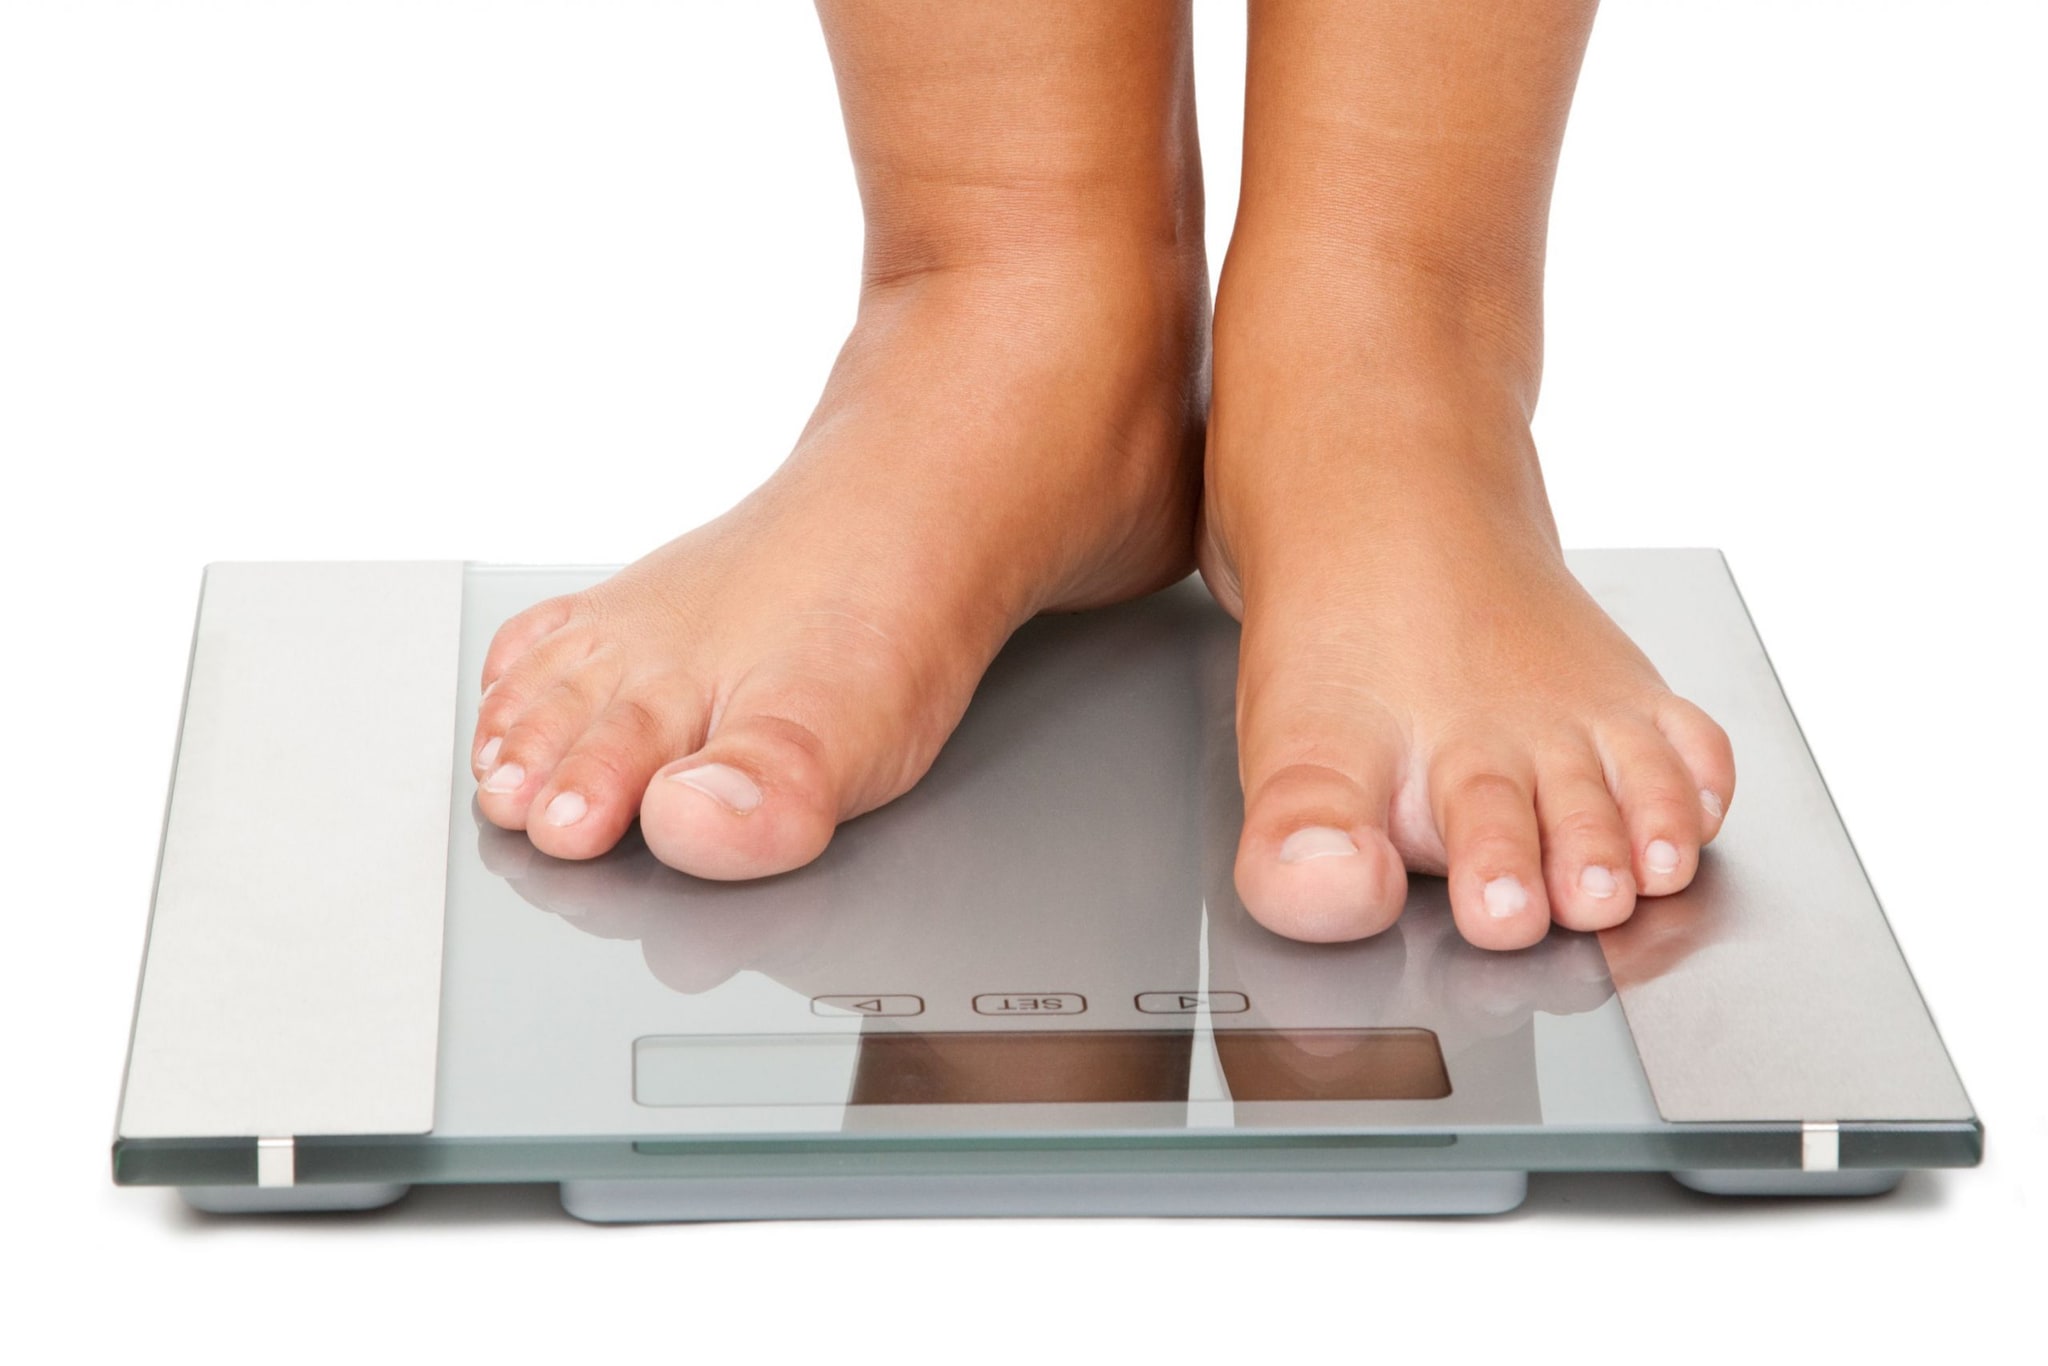 https://www.cdc.gov/healthyweight/spanish/assessing/images/Feet-on-scales.jpg?_=67949